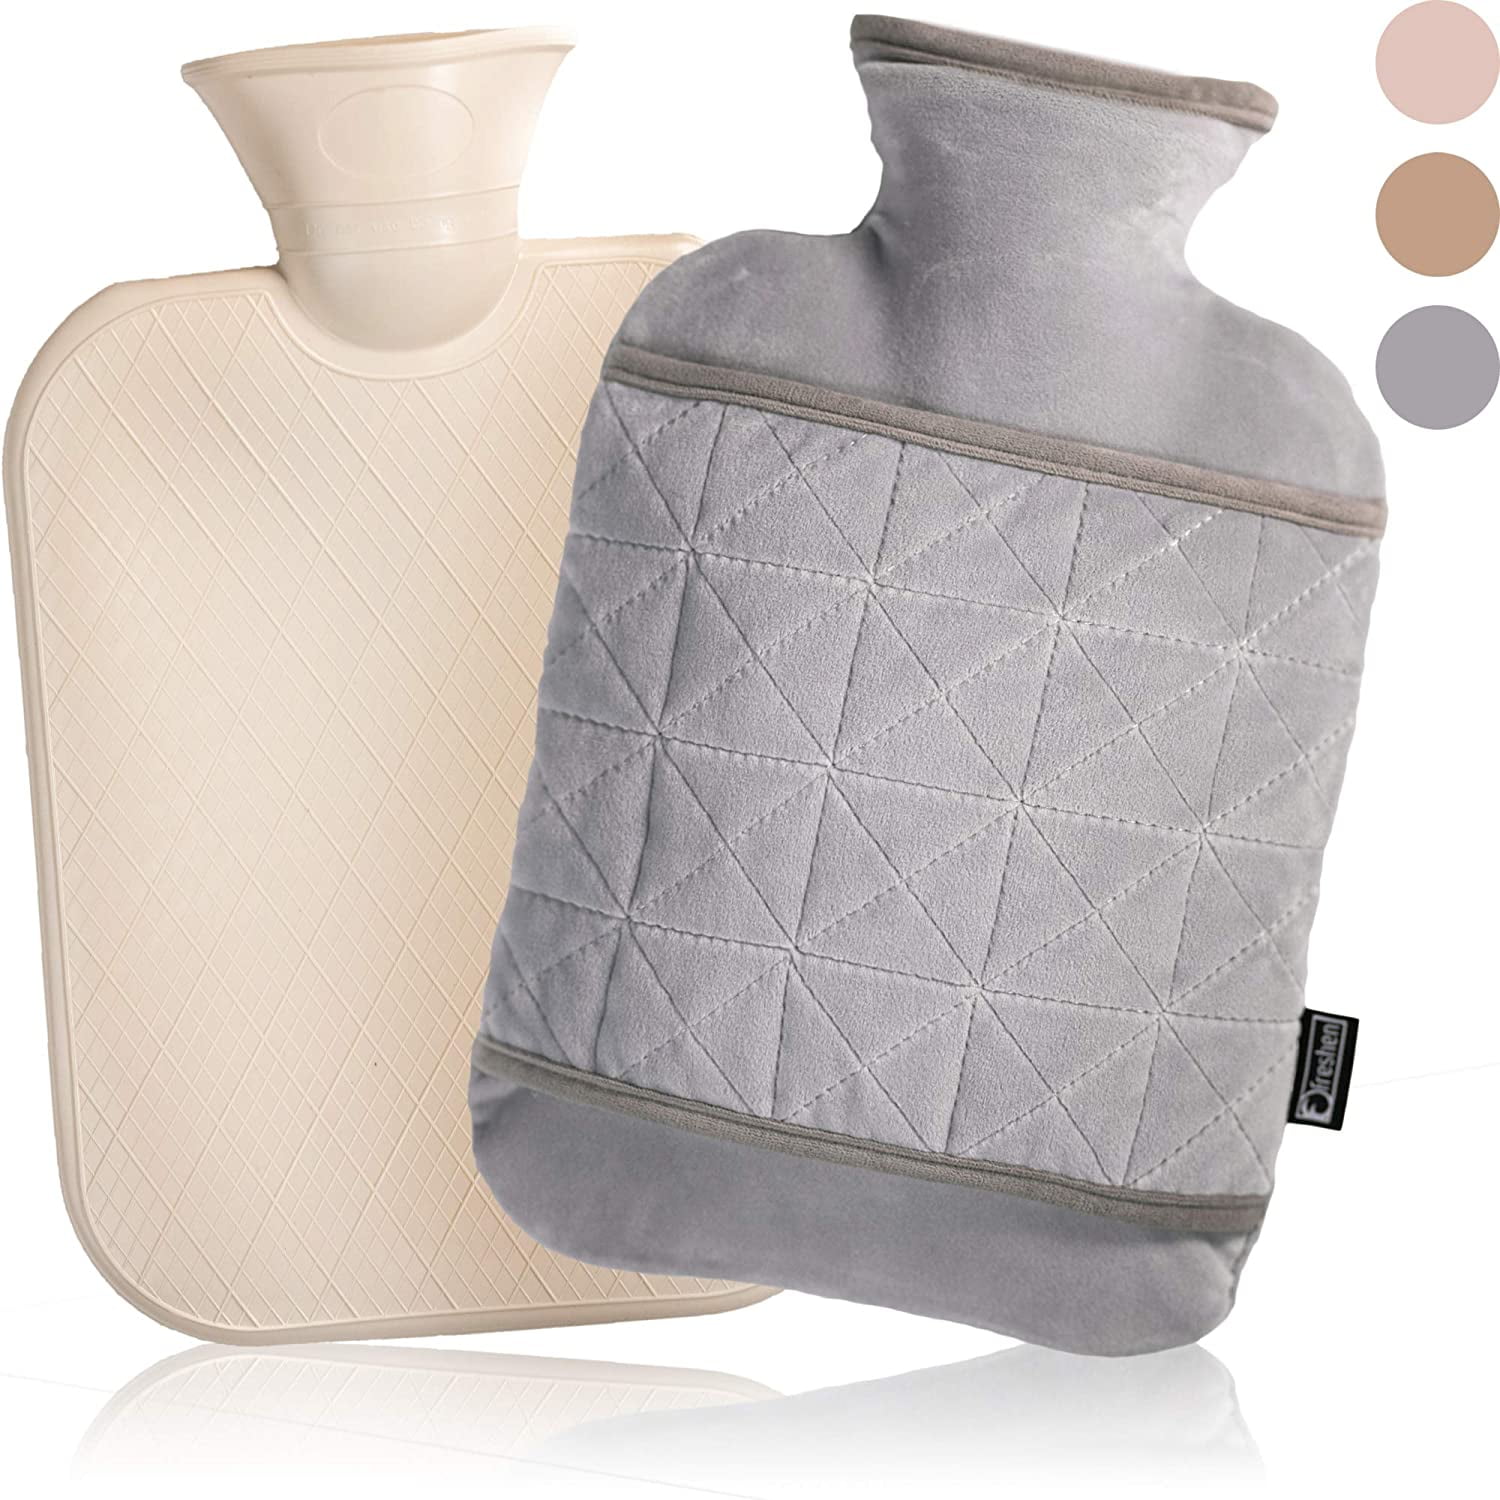 MCP KEYI Electrothermal Hot Water Bag For Pain Relief (Random Color) :  Amazon.in: Health & Personal Care